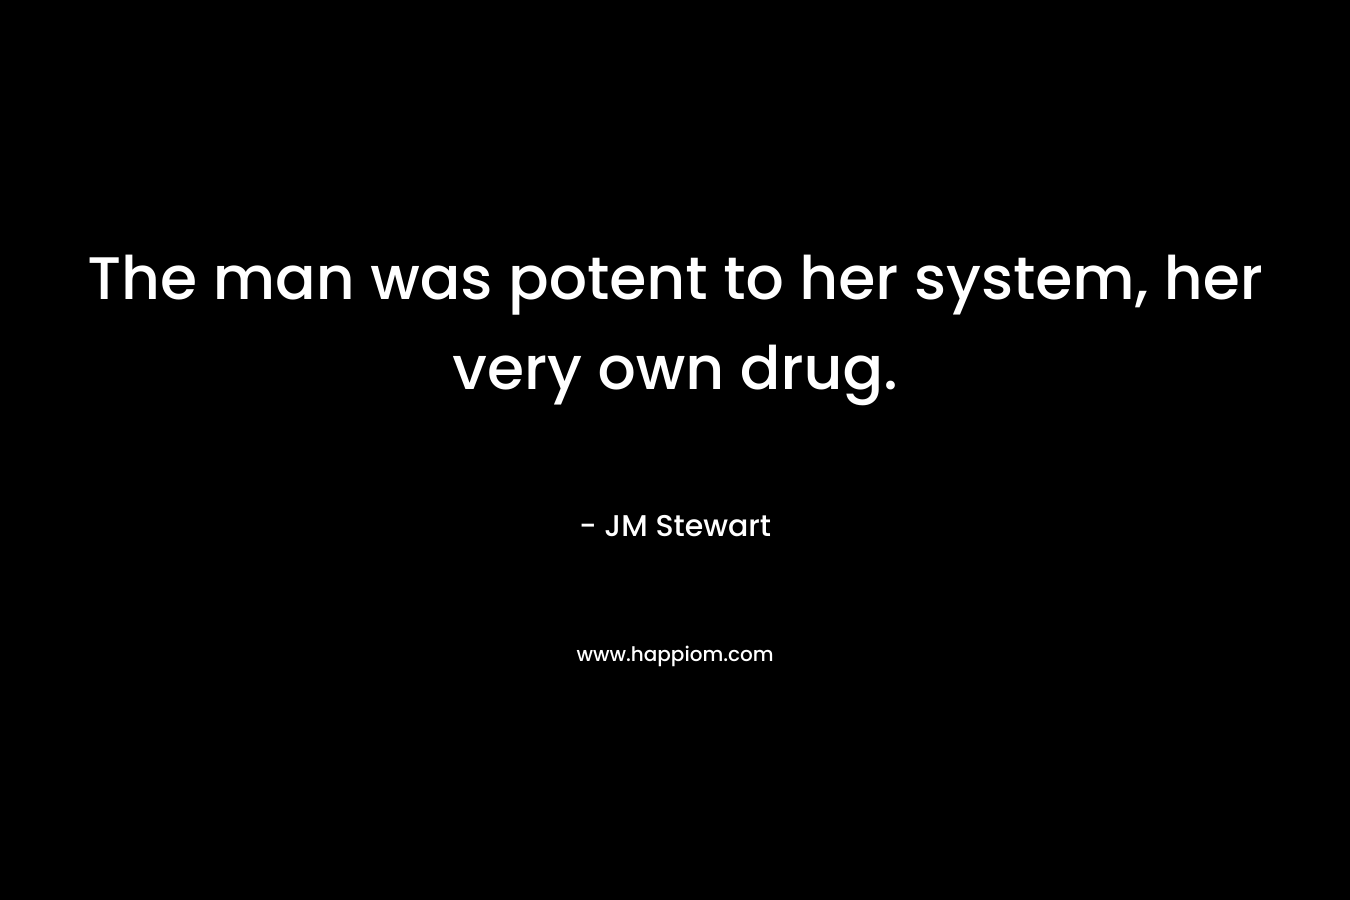 The man was potent to her system, her very own drug. – JM Stewart